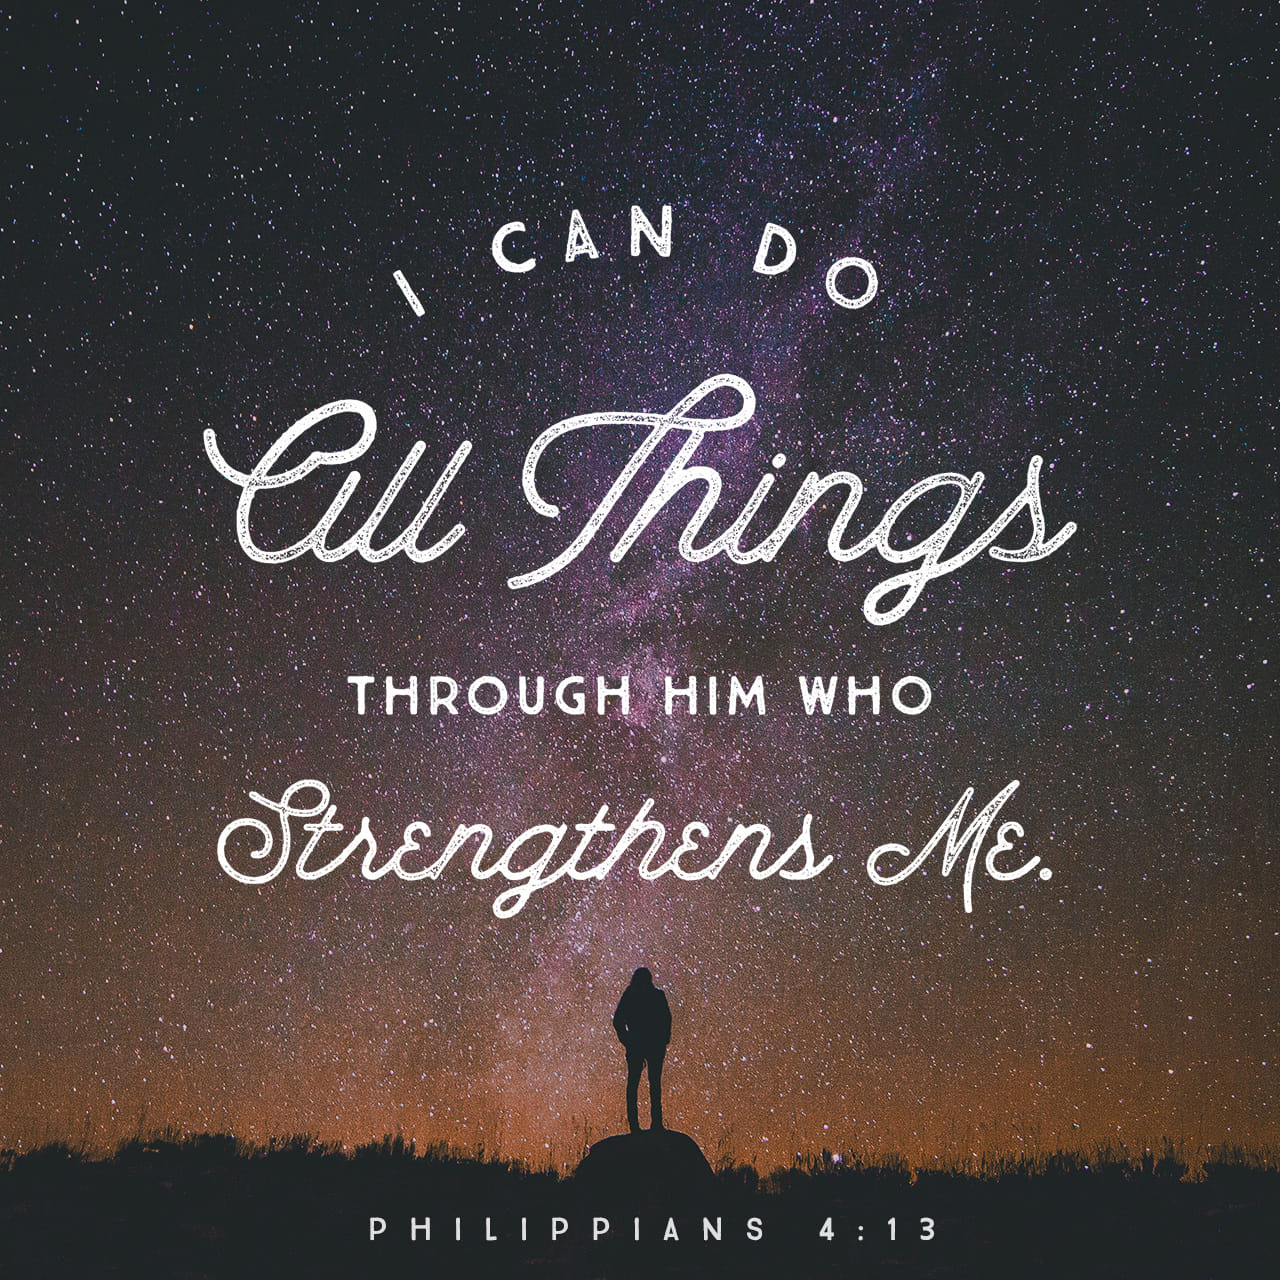 Bible Verse of the Day - day 214 - image 472 (Philippians 4:13)